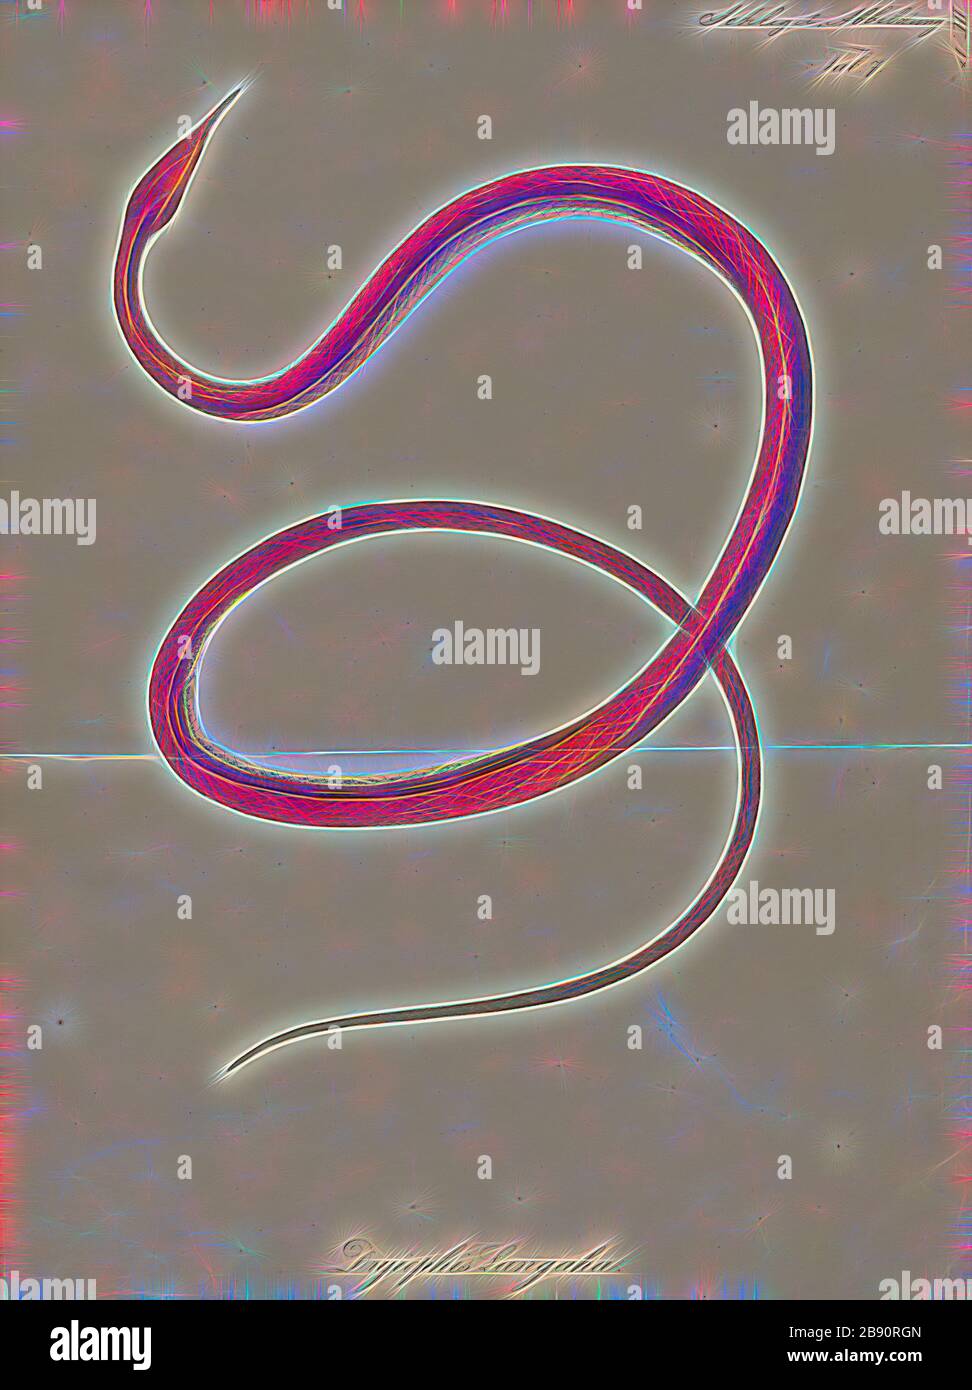 Langaha nasuta, Print, Langaha is a small genus of colubrid snakes in the subfamily Pseudoxyrhophiinae. The genus contains three species, all of which are endemic to Madagascar., 1700-1880, Reimagined by Gibon, design of warm cheerful glowing of brightness and light rays radiance. Classic art reinvented with a modern twist. Photography inspired by futurism, embracing dynamic energy of modern technology, movement, speed and revolutionize culture. Stock Photo